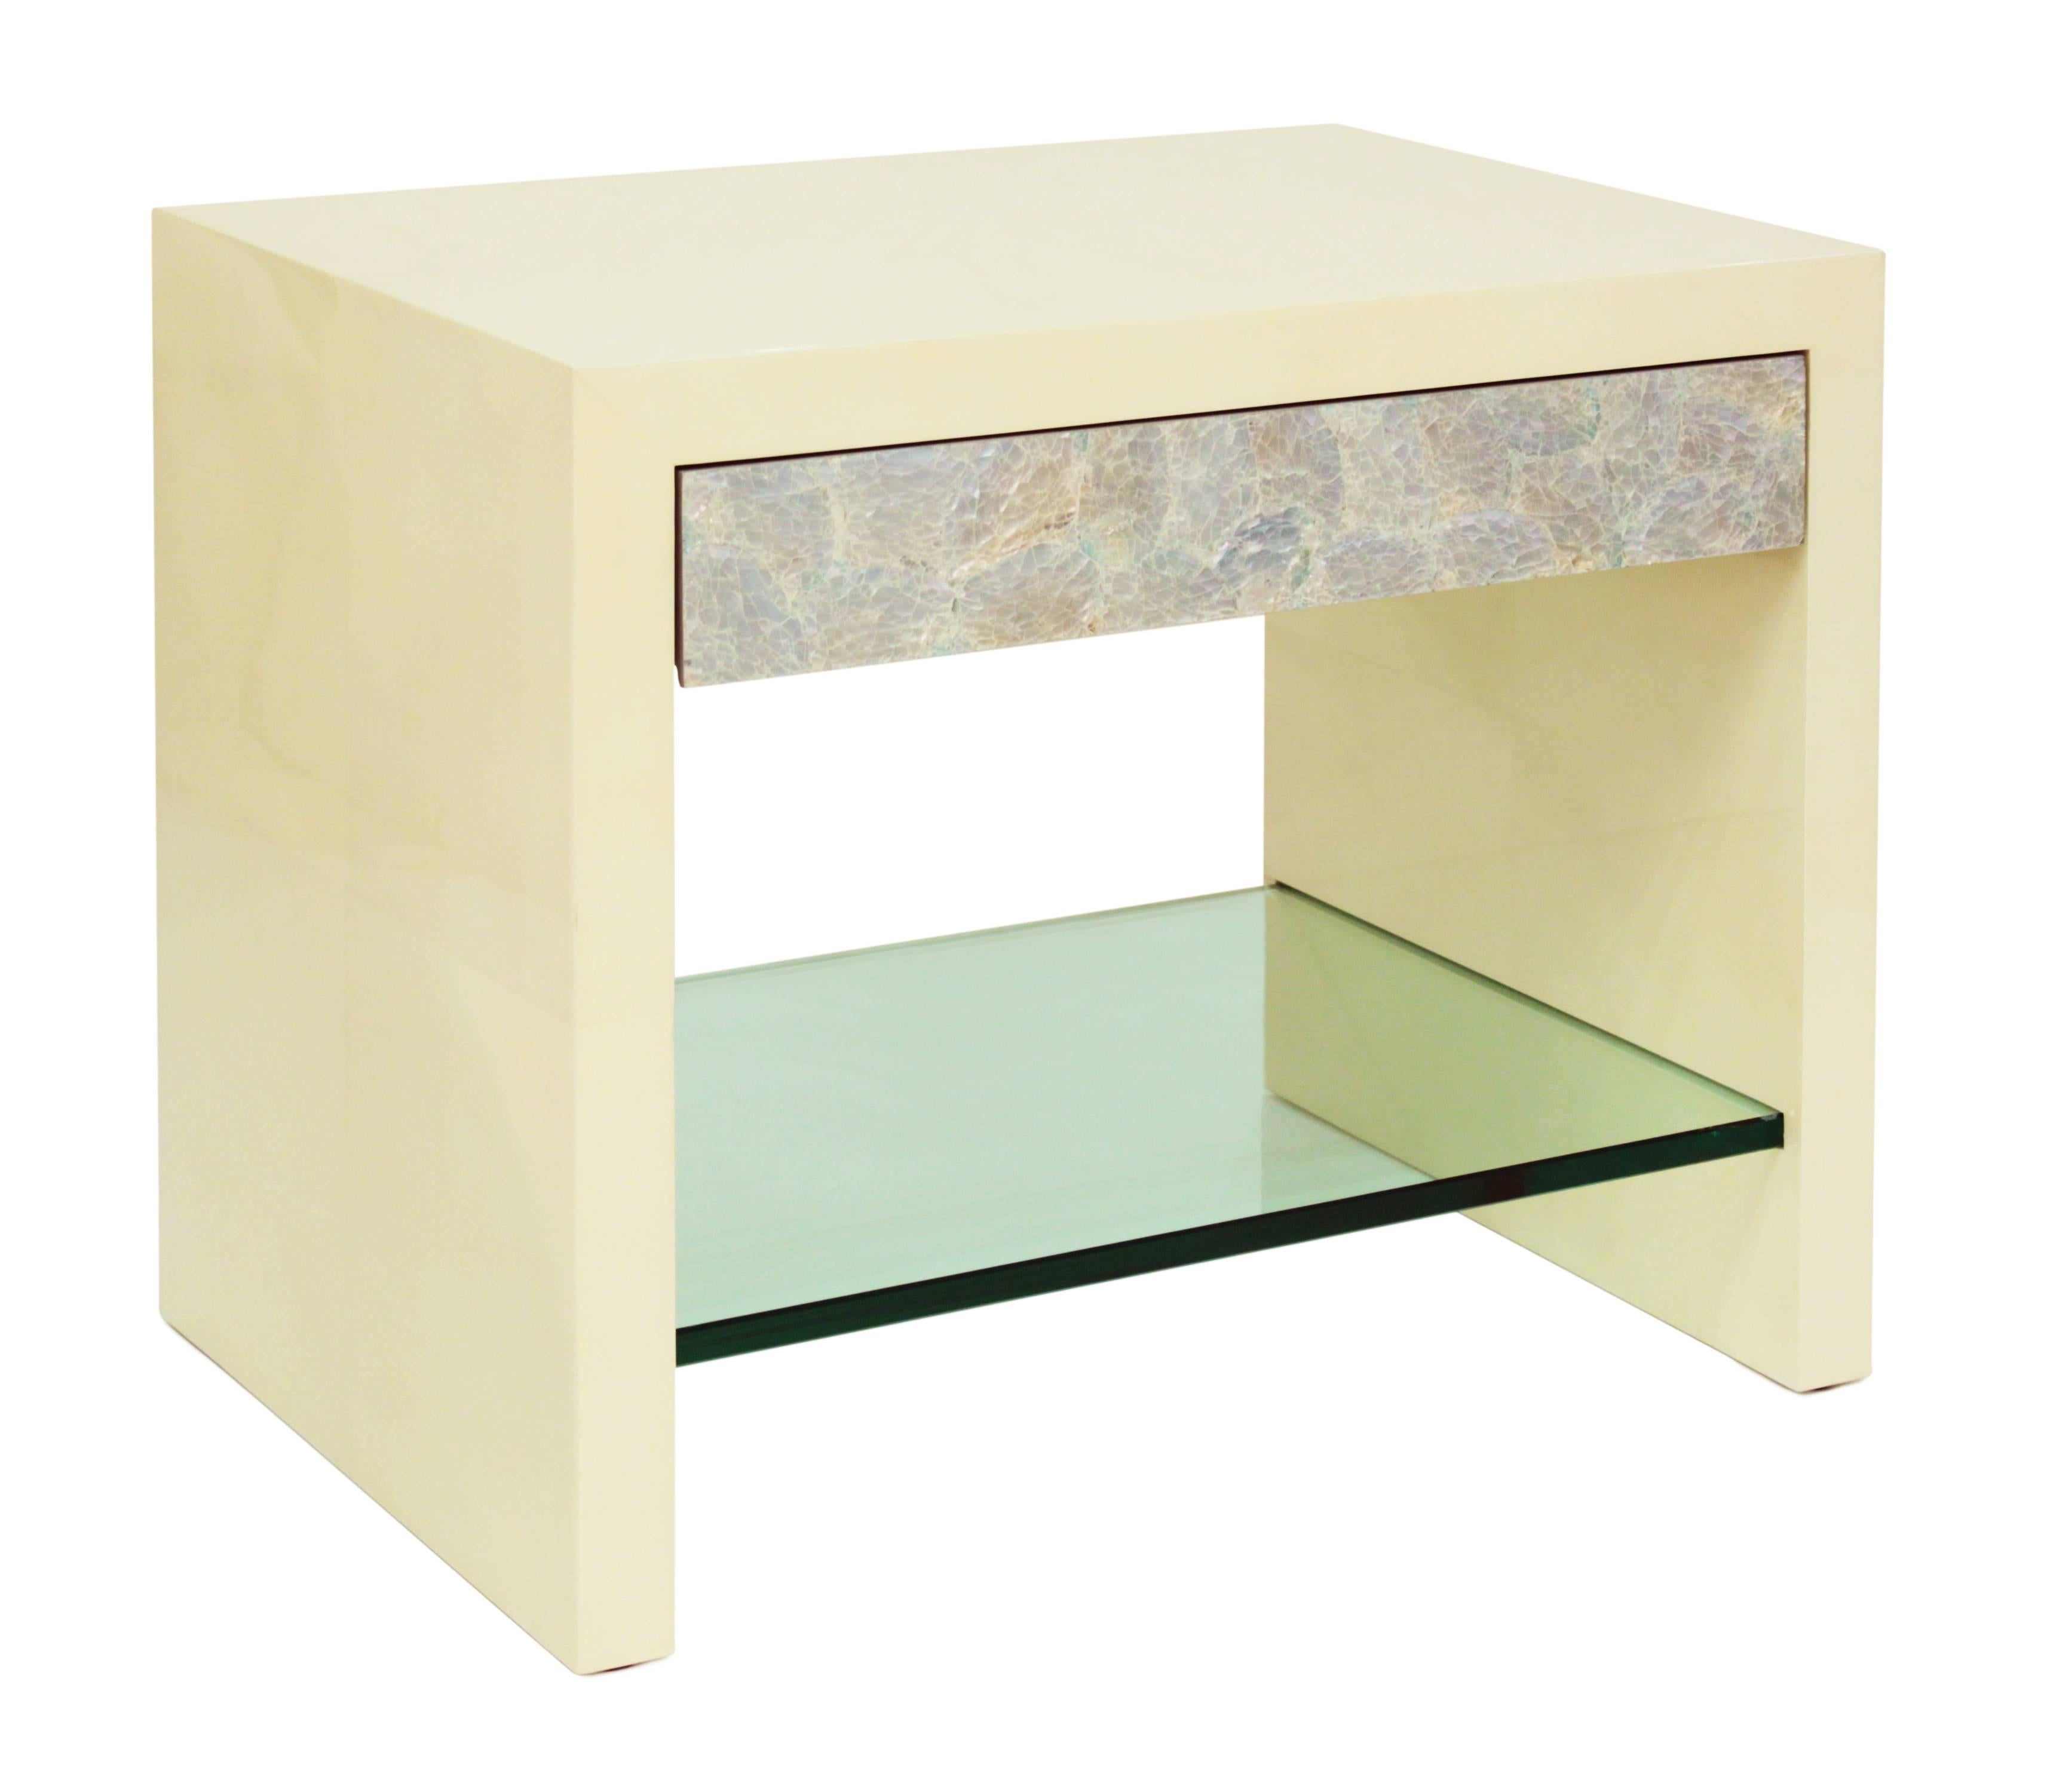 
Pair of “Pearl Front Bedside Tables” covered in lacquered goatskin with drawer in mother of pearl and lower glass shelf by Evan Lobel for Lobel Originals. These were custom-made in the most meticulous way.
      